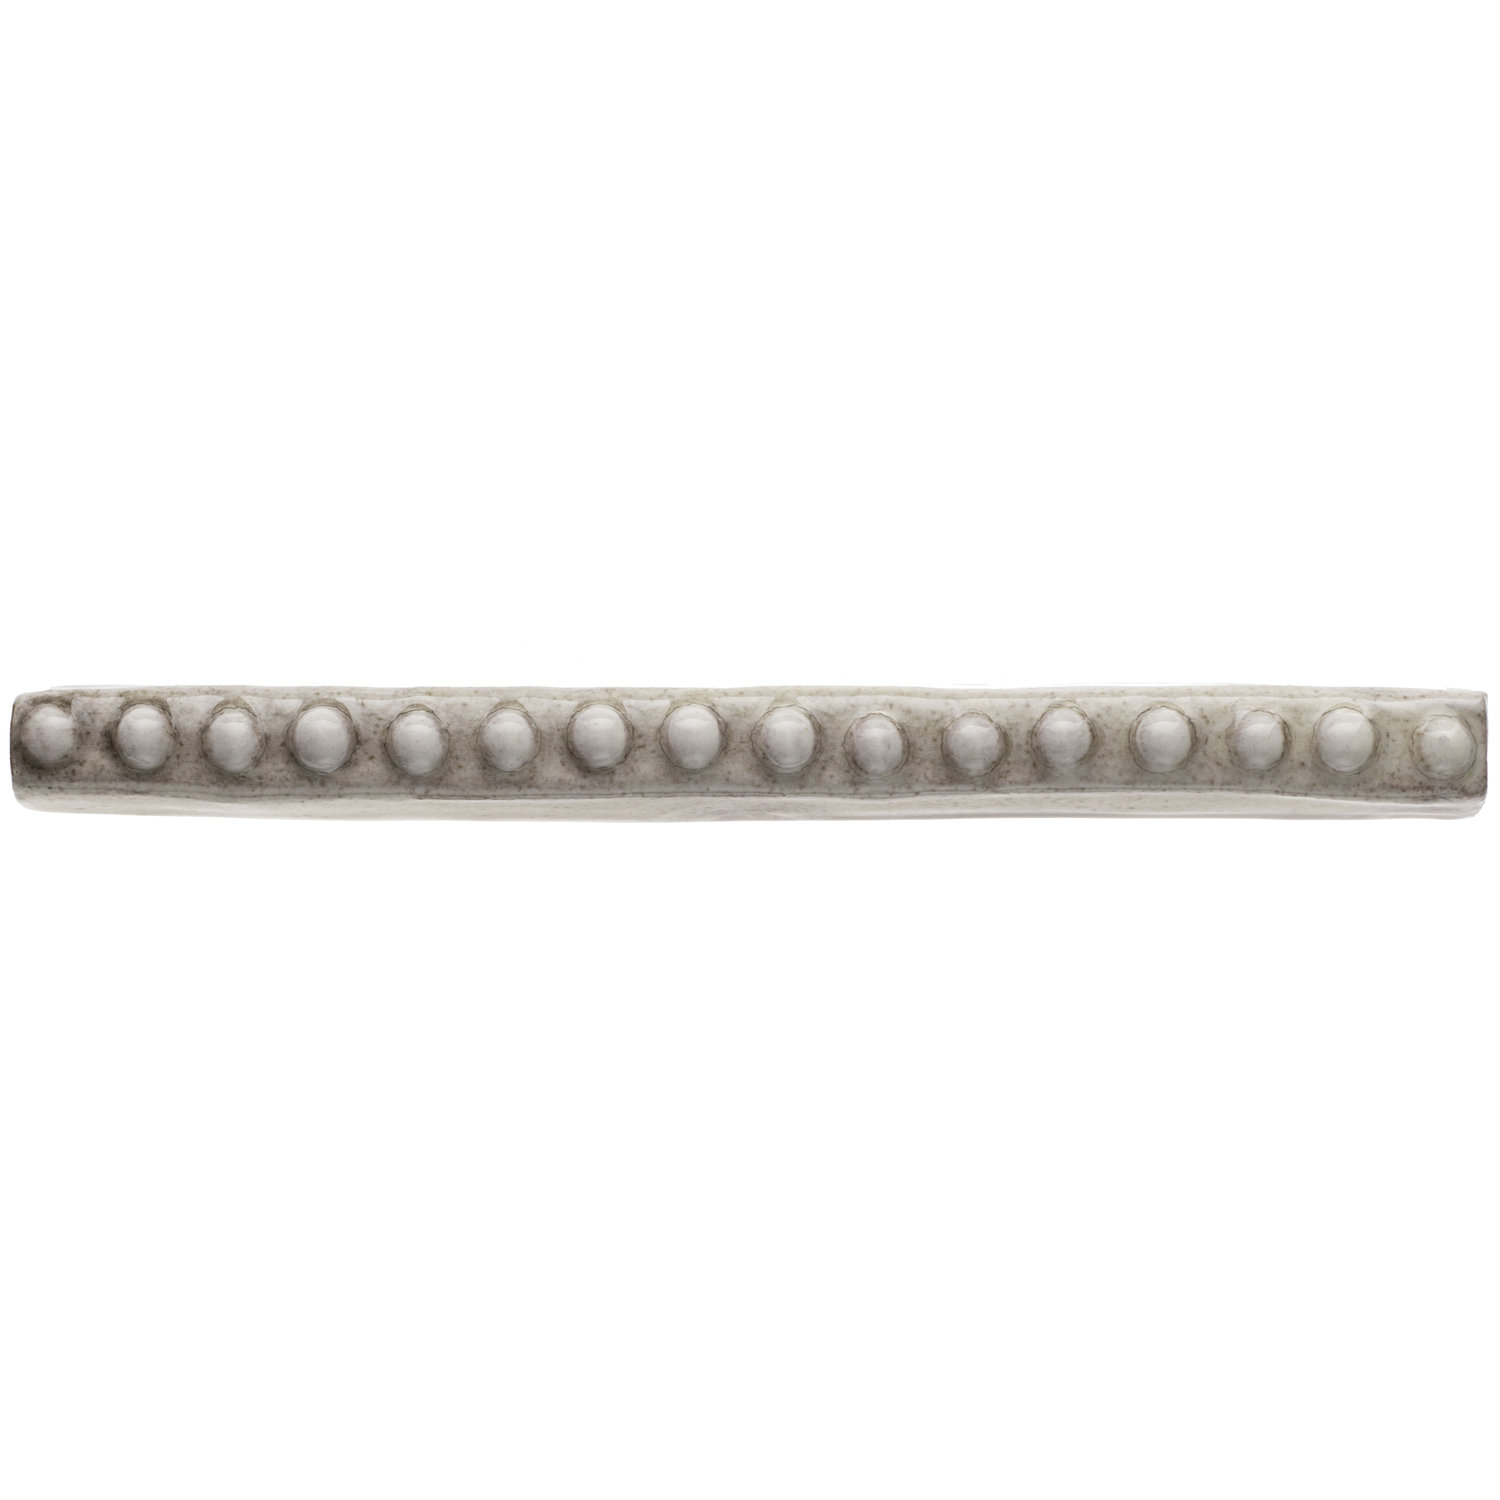 Expo SM3932 Flat Back Pearl Trim, 72-Inch